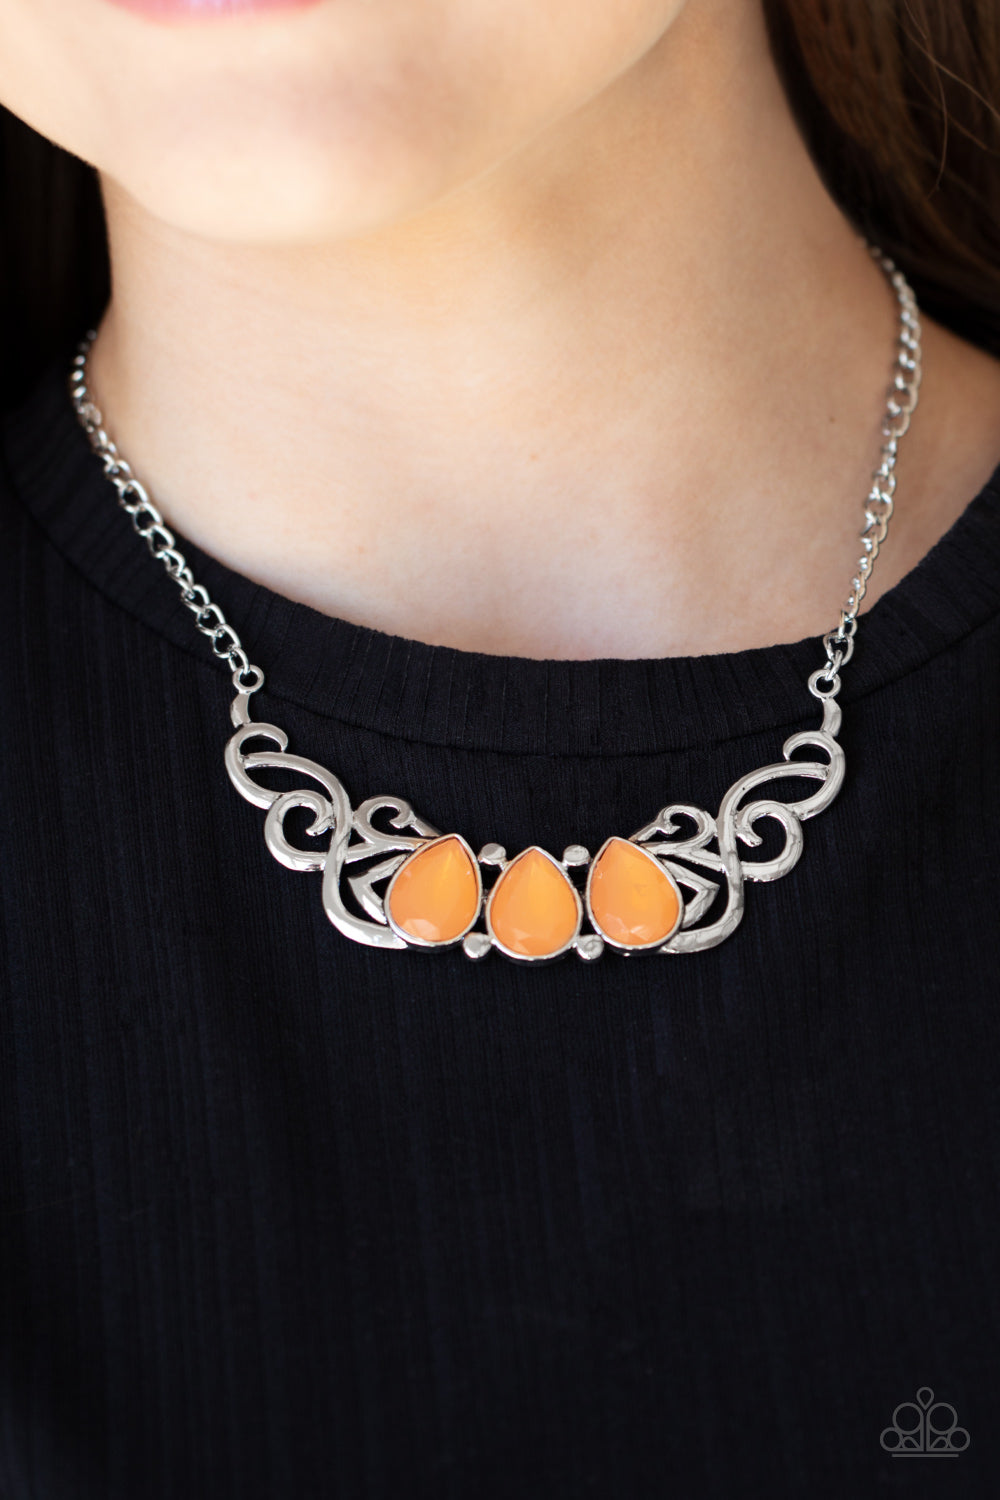 Heavenly Happenstance Orange Necklace - Paparazzi Accessories  Featuring an opaque iridescence, a row of Marigold teardrop beads are pressed into a studded backdrop of vine-like silver filigree, creating a whimsical centerpiece below the collar. Features an adjustable clasp closure.  All Paparazzi Accessories are lead free and nickel free!  Sold as one individual necklace. Includes one pair of matching earrings.